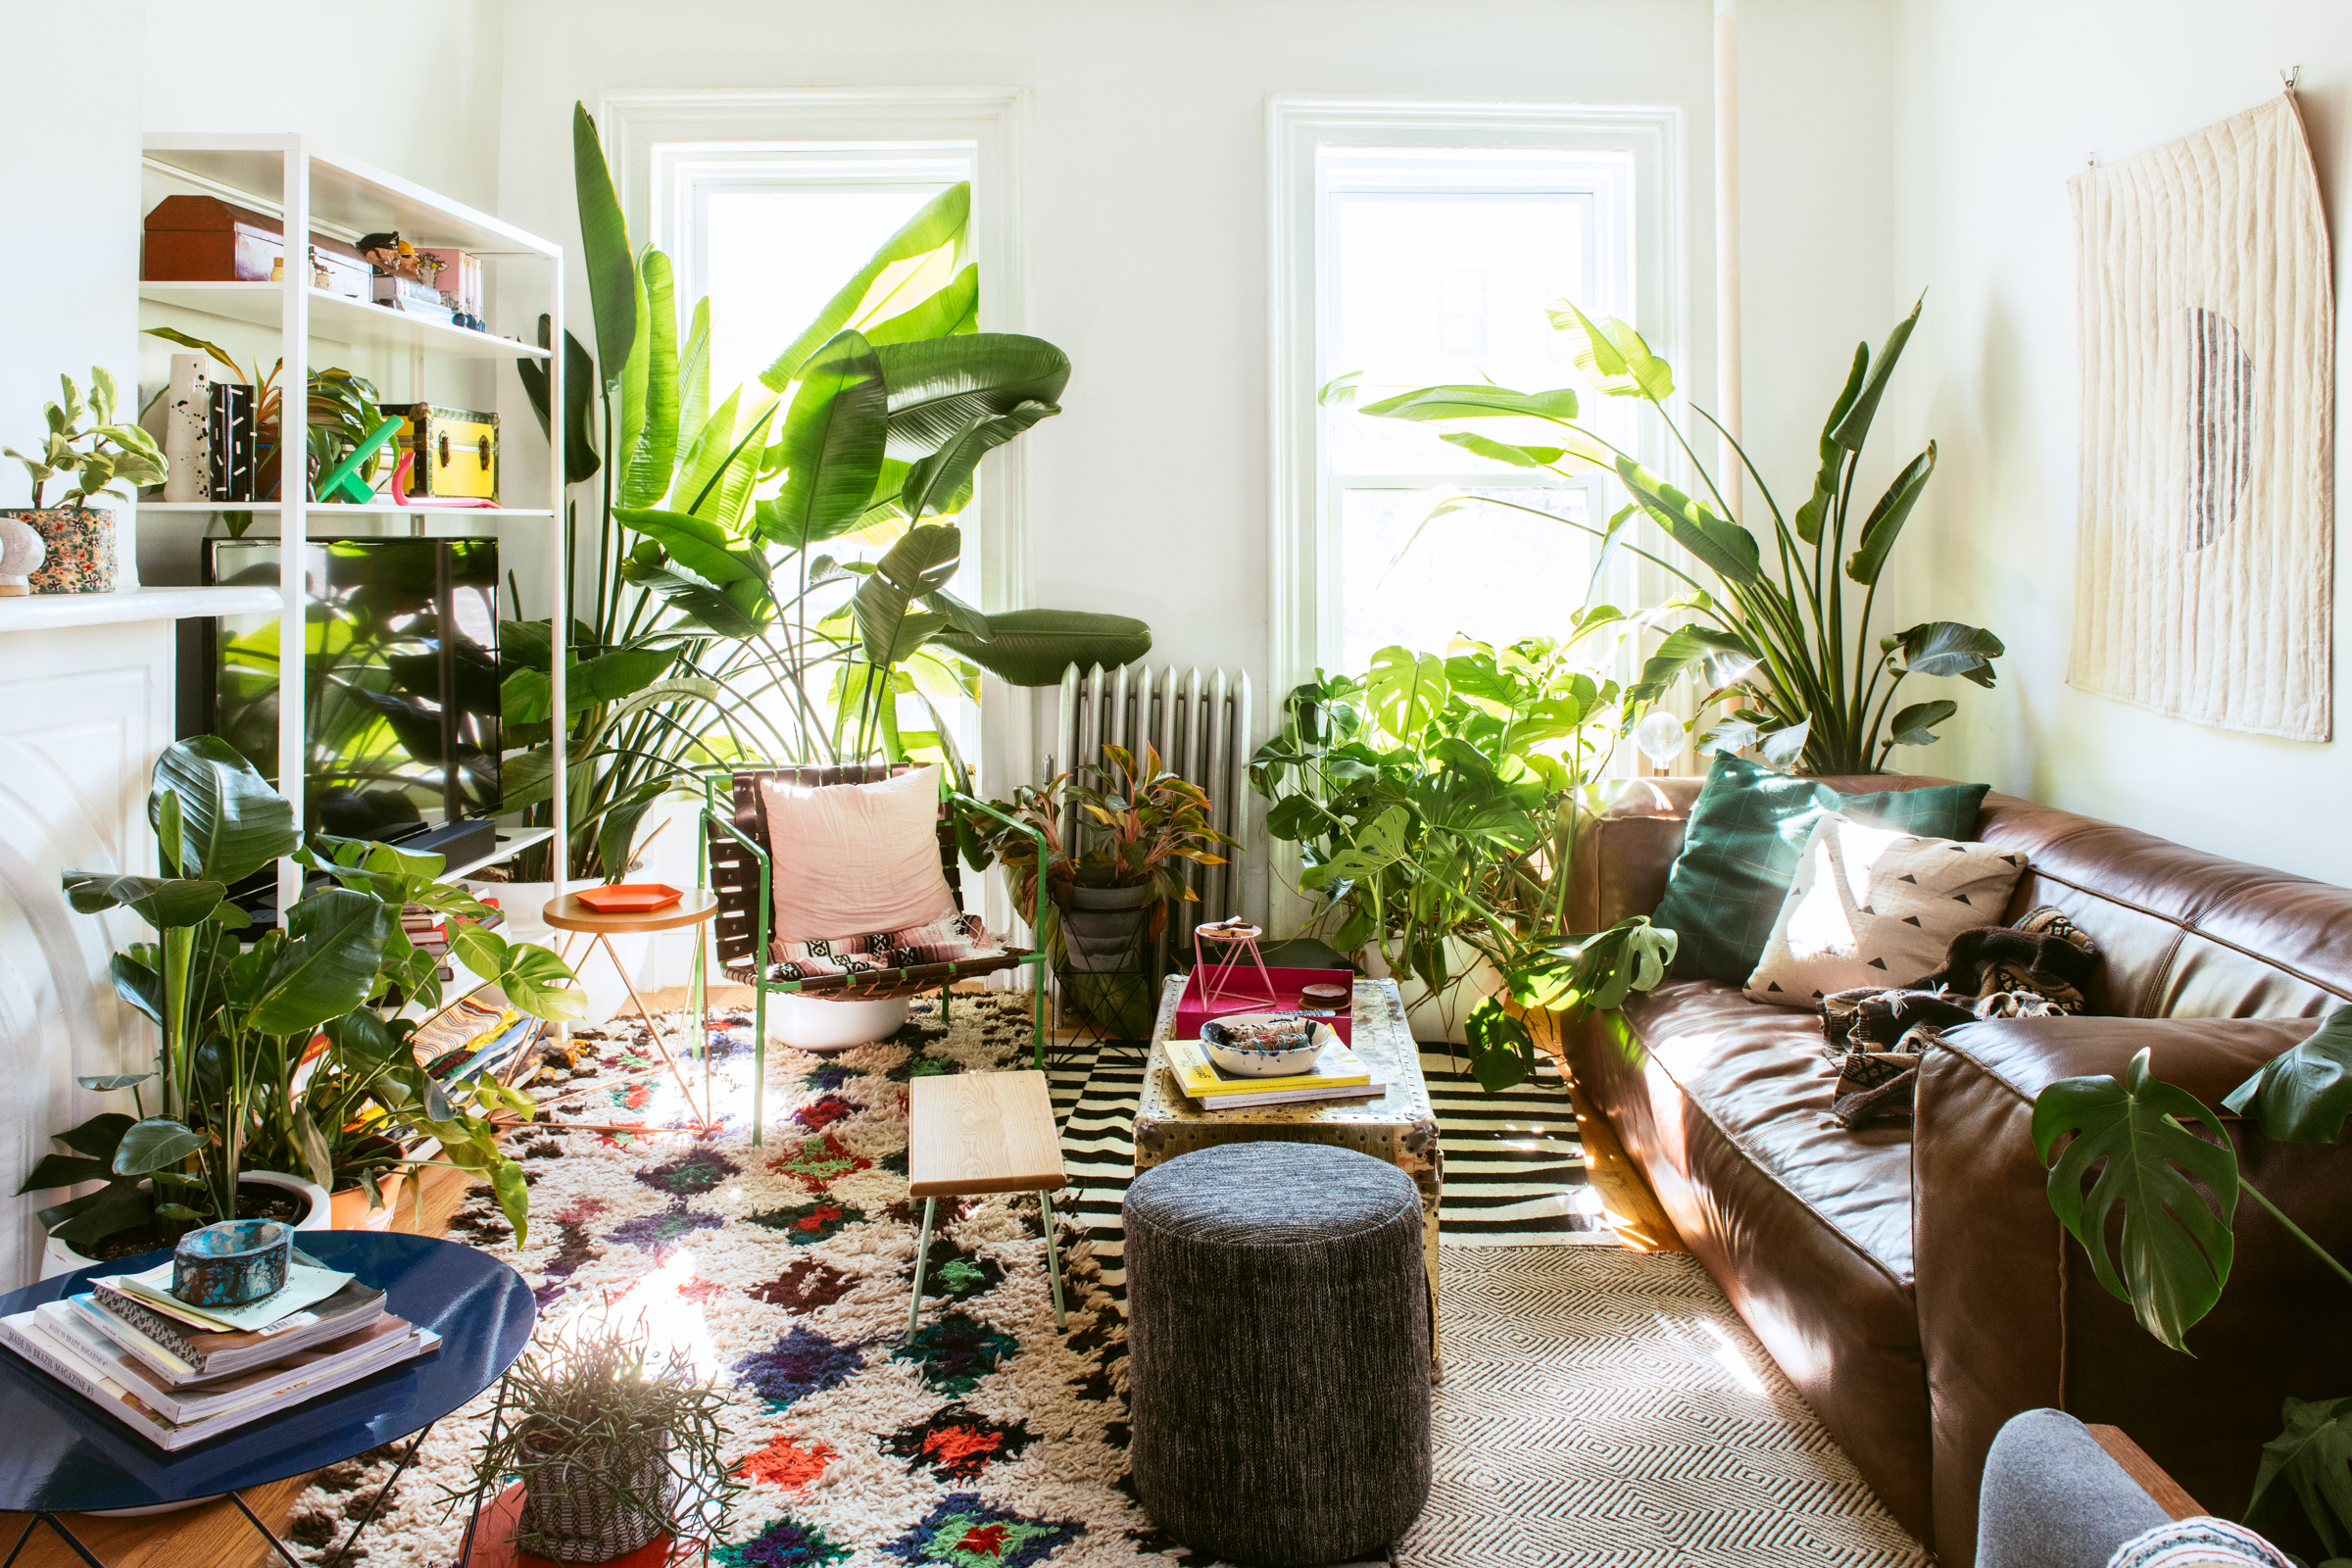 Living room with two windows, brown sofa, patterned carpet, and lots of plants. 